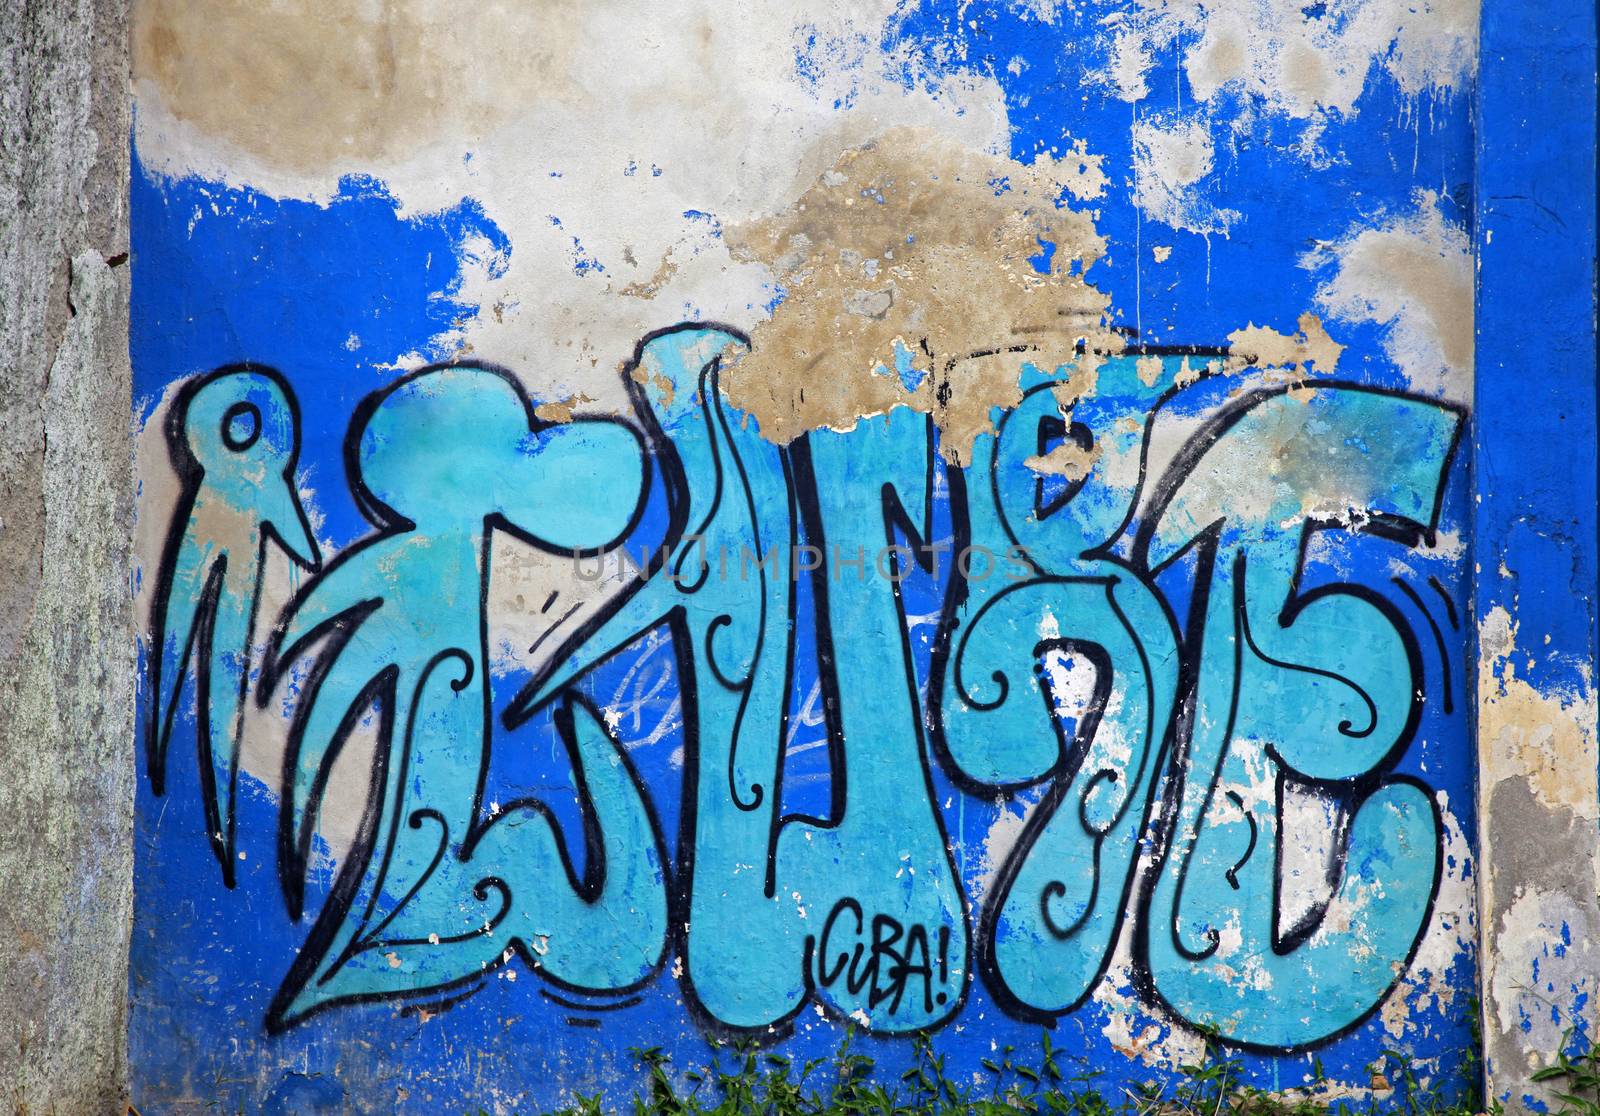 Graffiti on the wall of a building in Havana